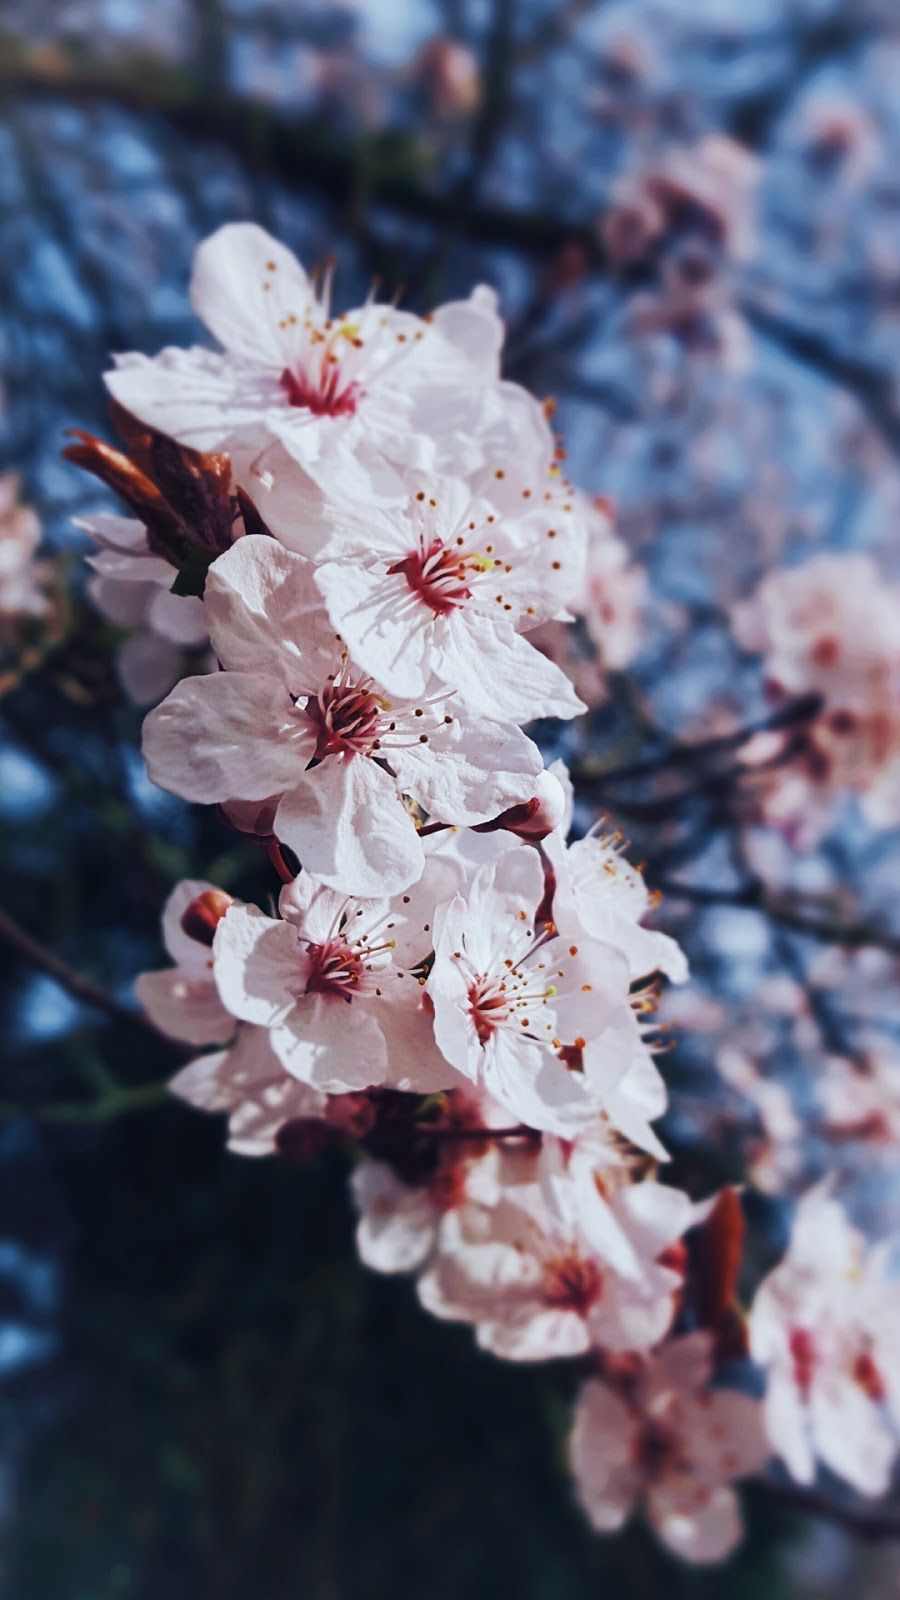 Spring Cherry iPhone wallpaper. Nature iphone wallpaper, iPhone background nature, Flower phone wallpaper